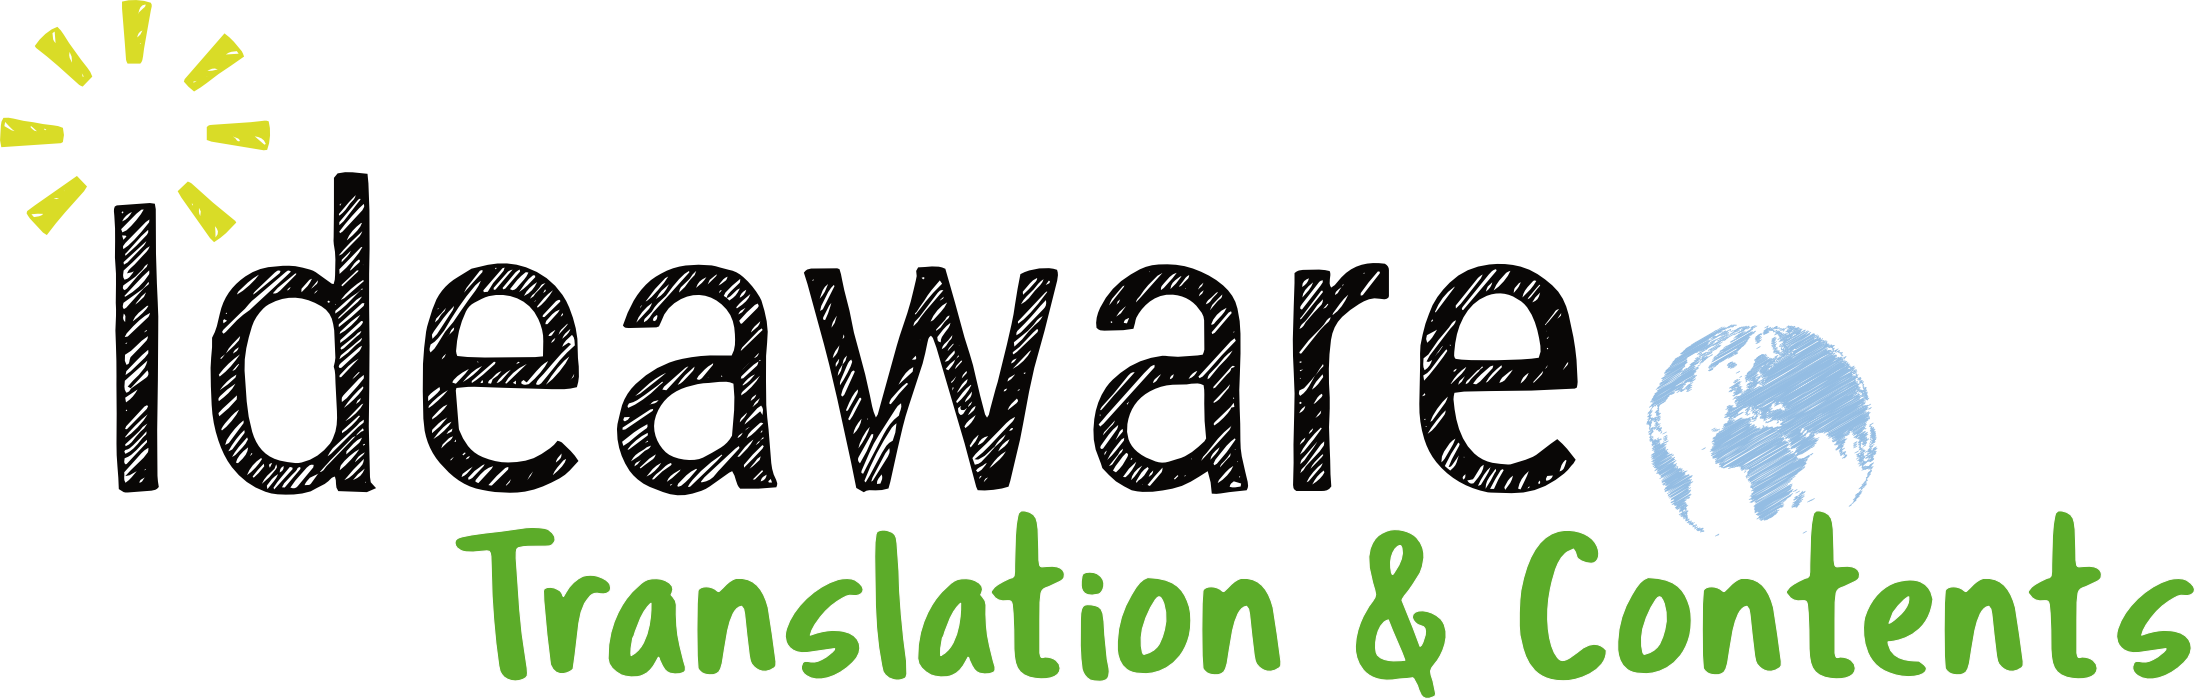 Ideaware Translation & Contents